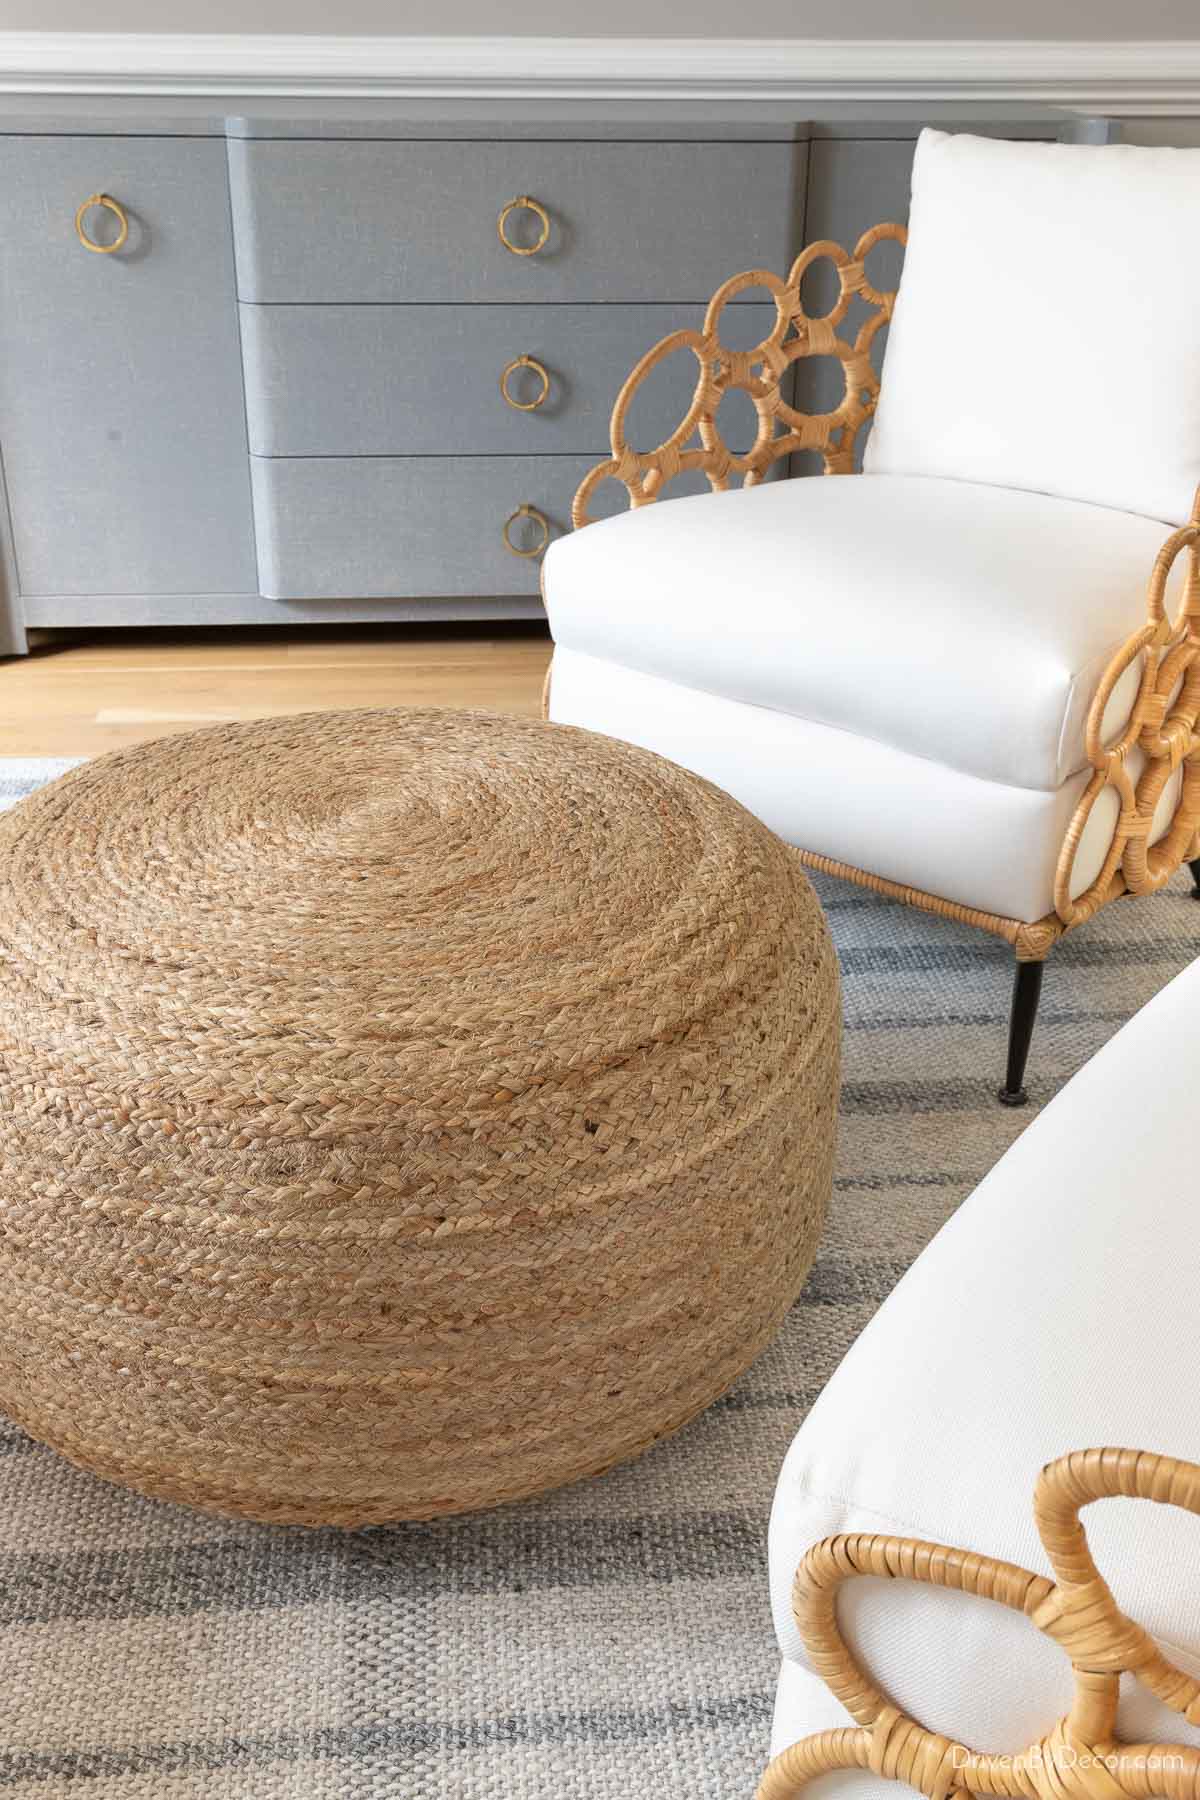 A jute pouf used as a shared ottoman between two chairs